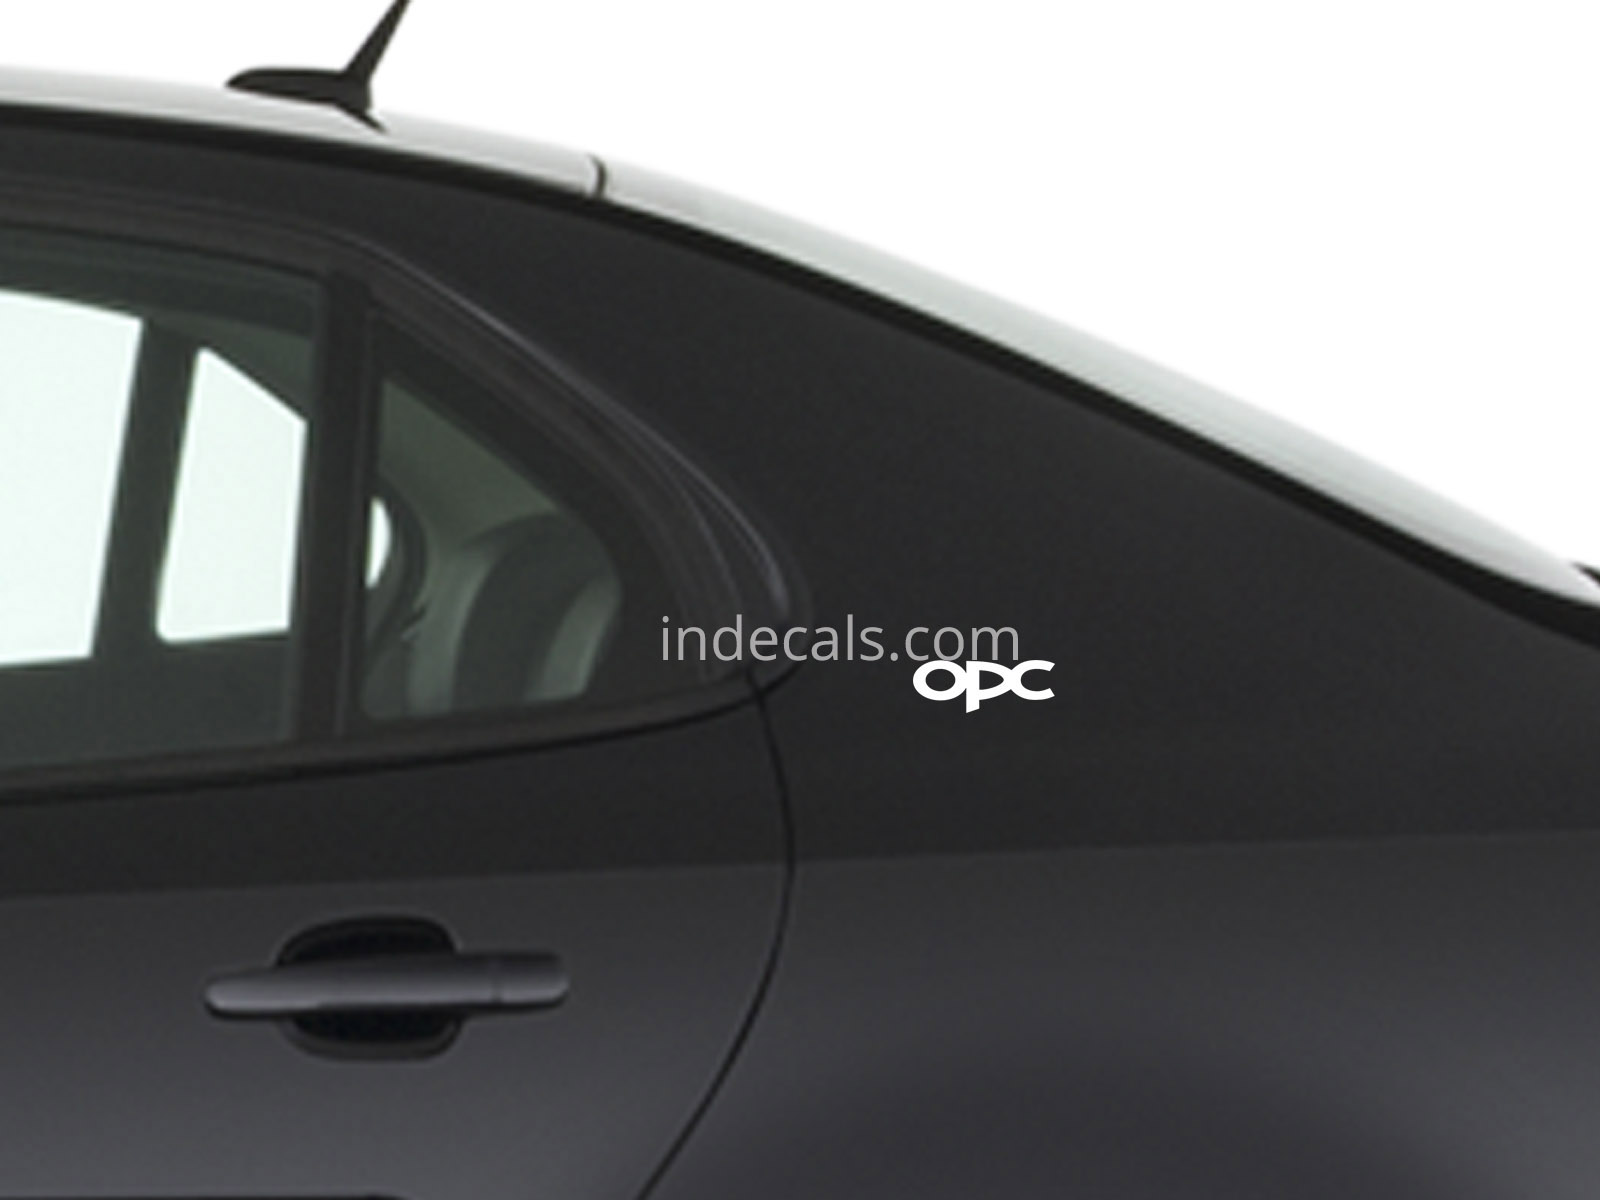 3 x Opel OPC Stickers for Rear Wing - White